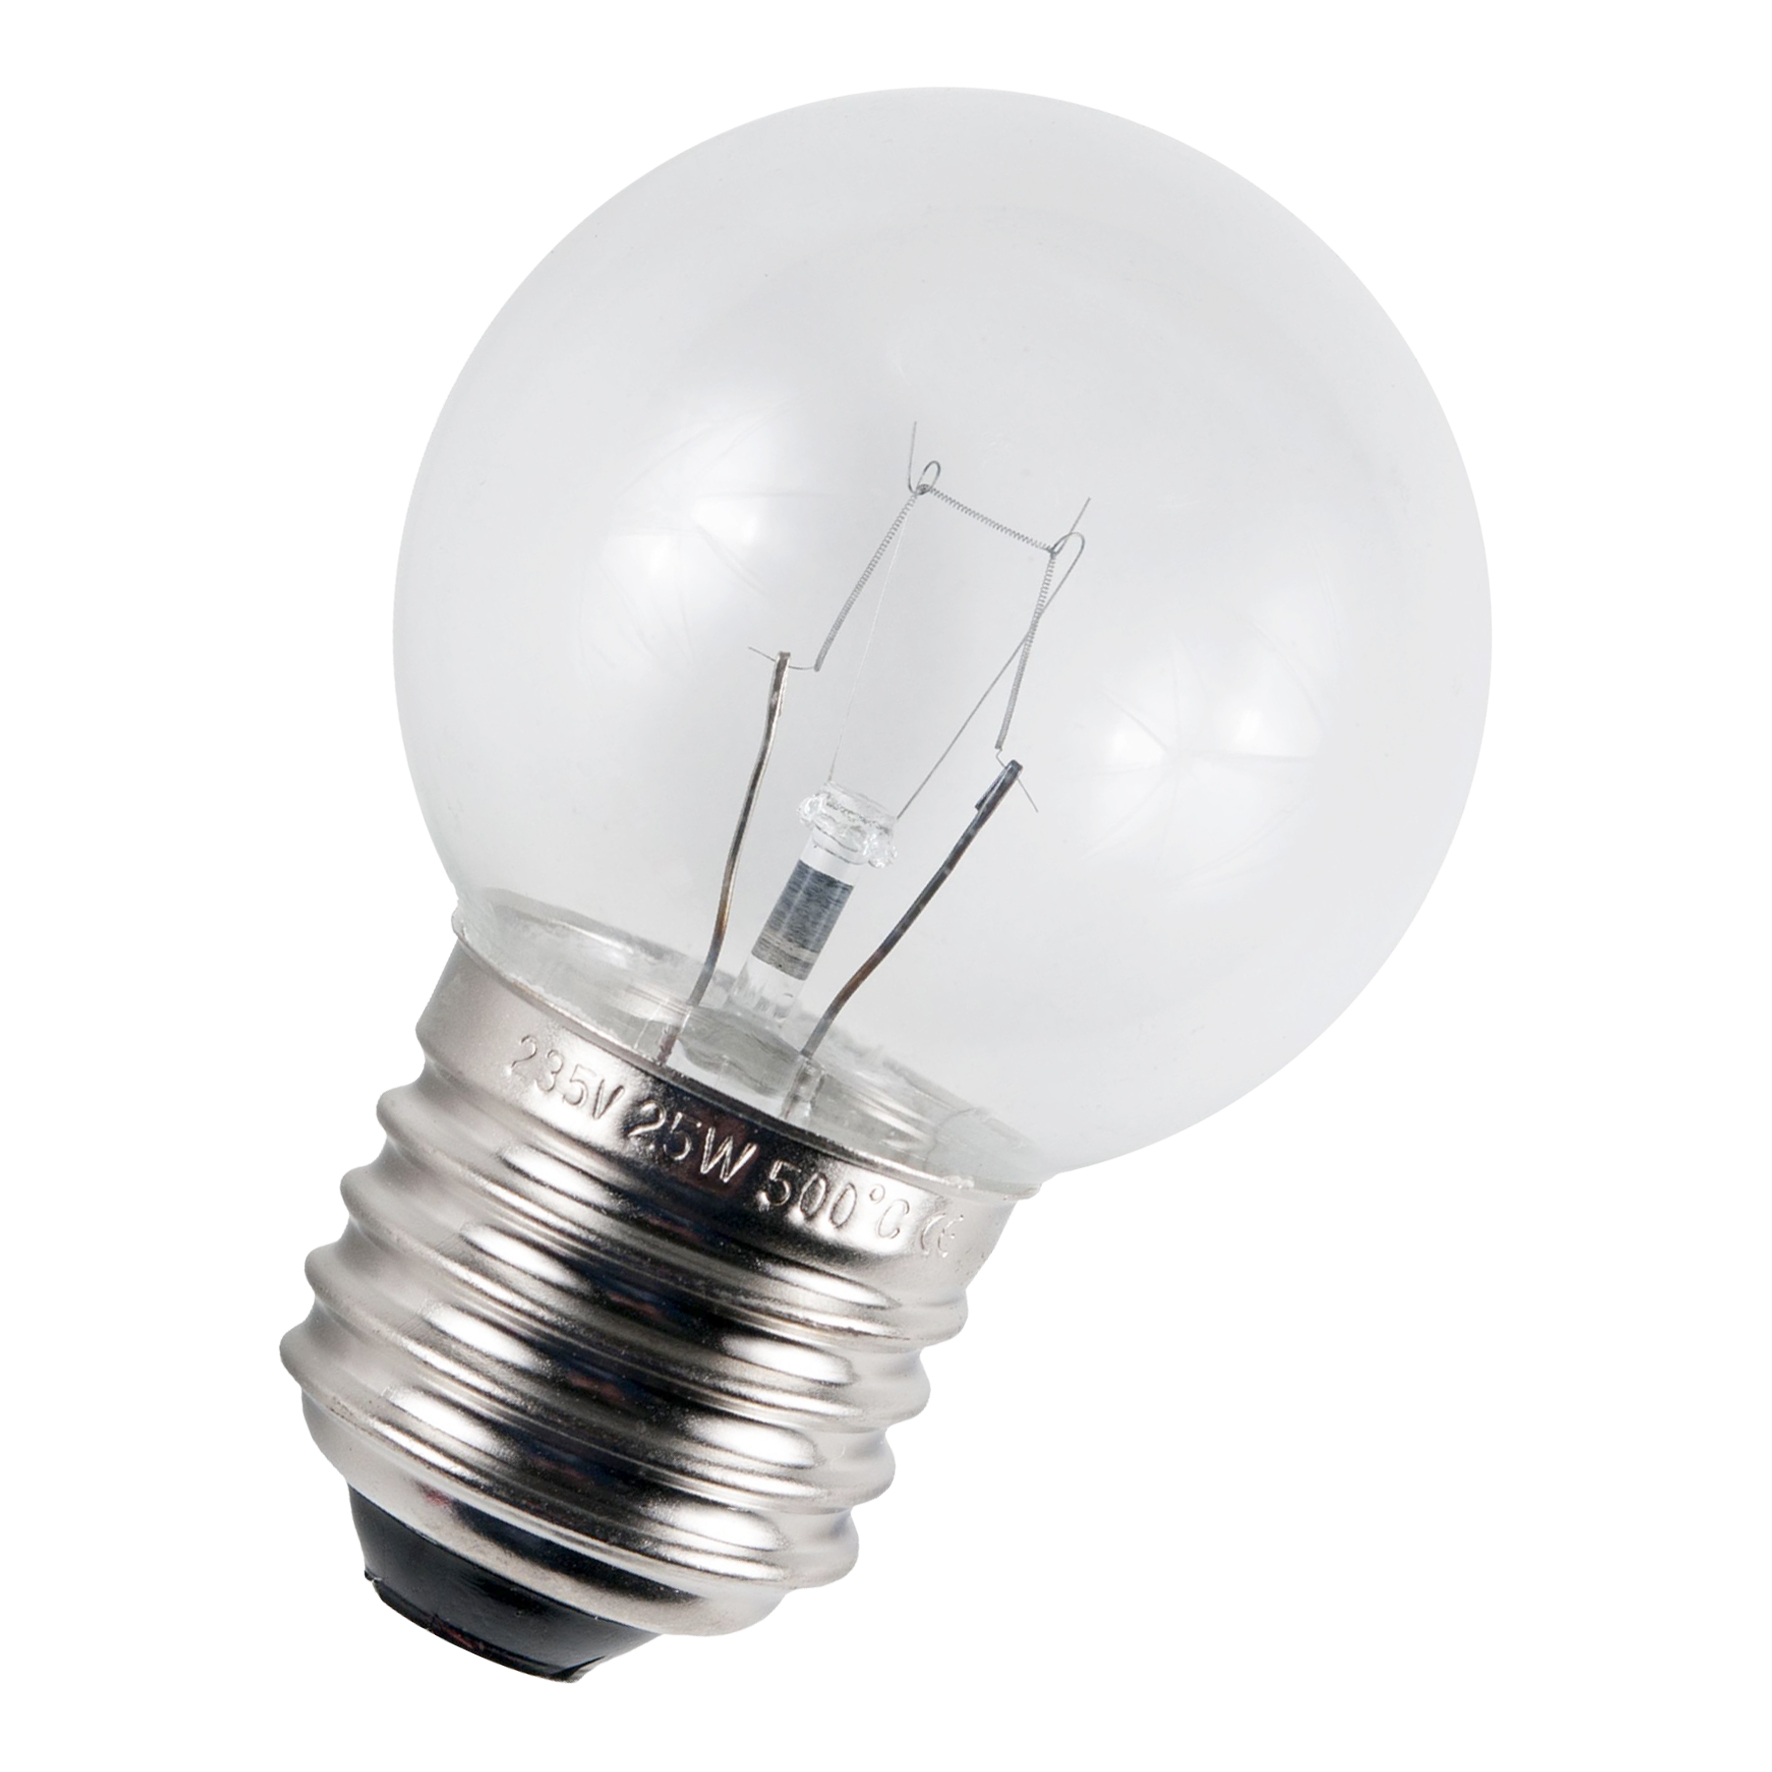 05994100030751 - Sphere-shaped incandescent Lamps | - e-Bailey Bailey lamp 